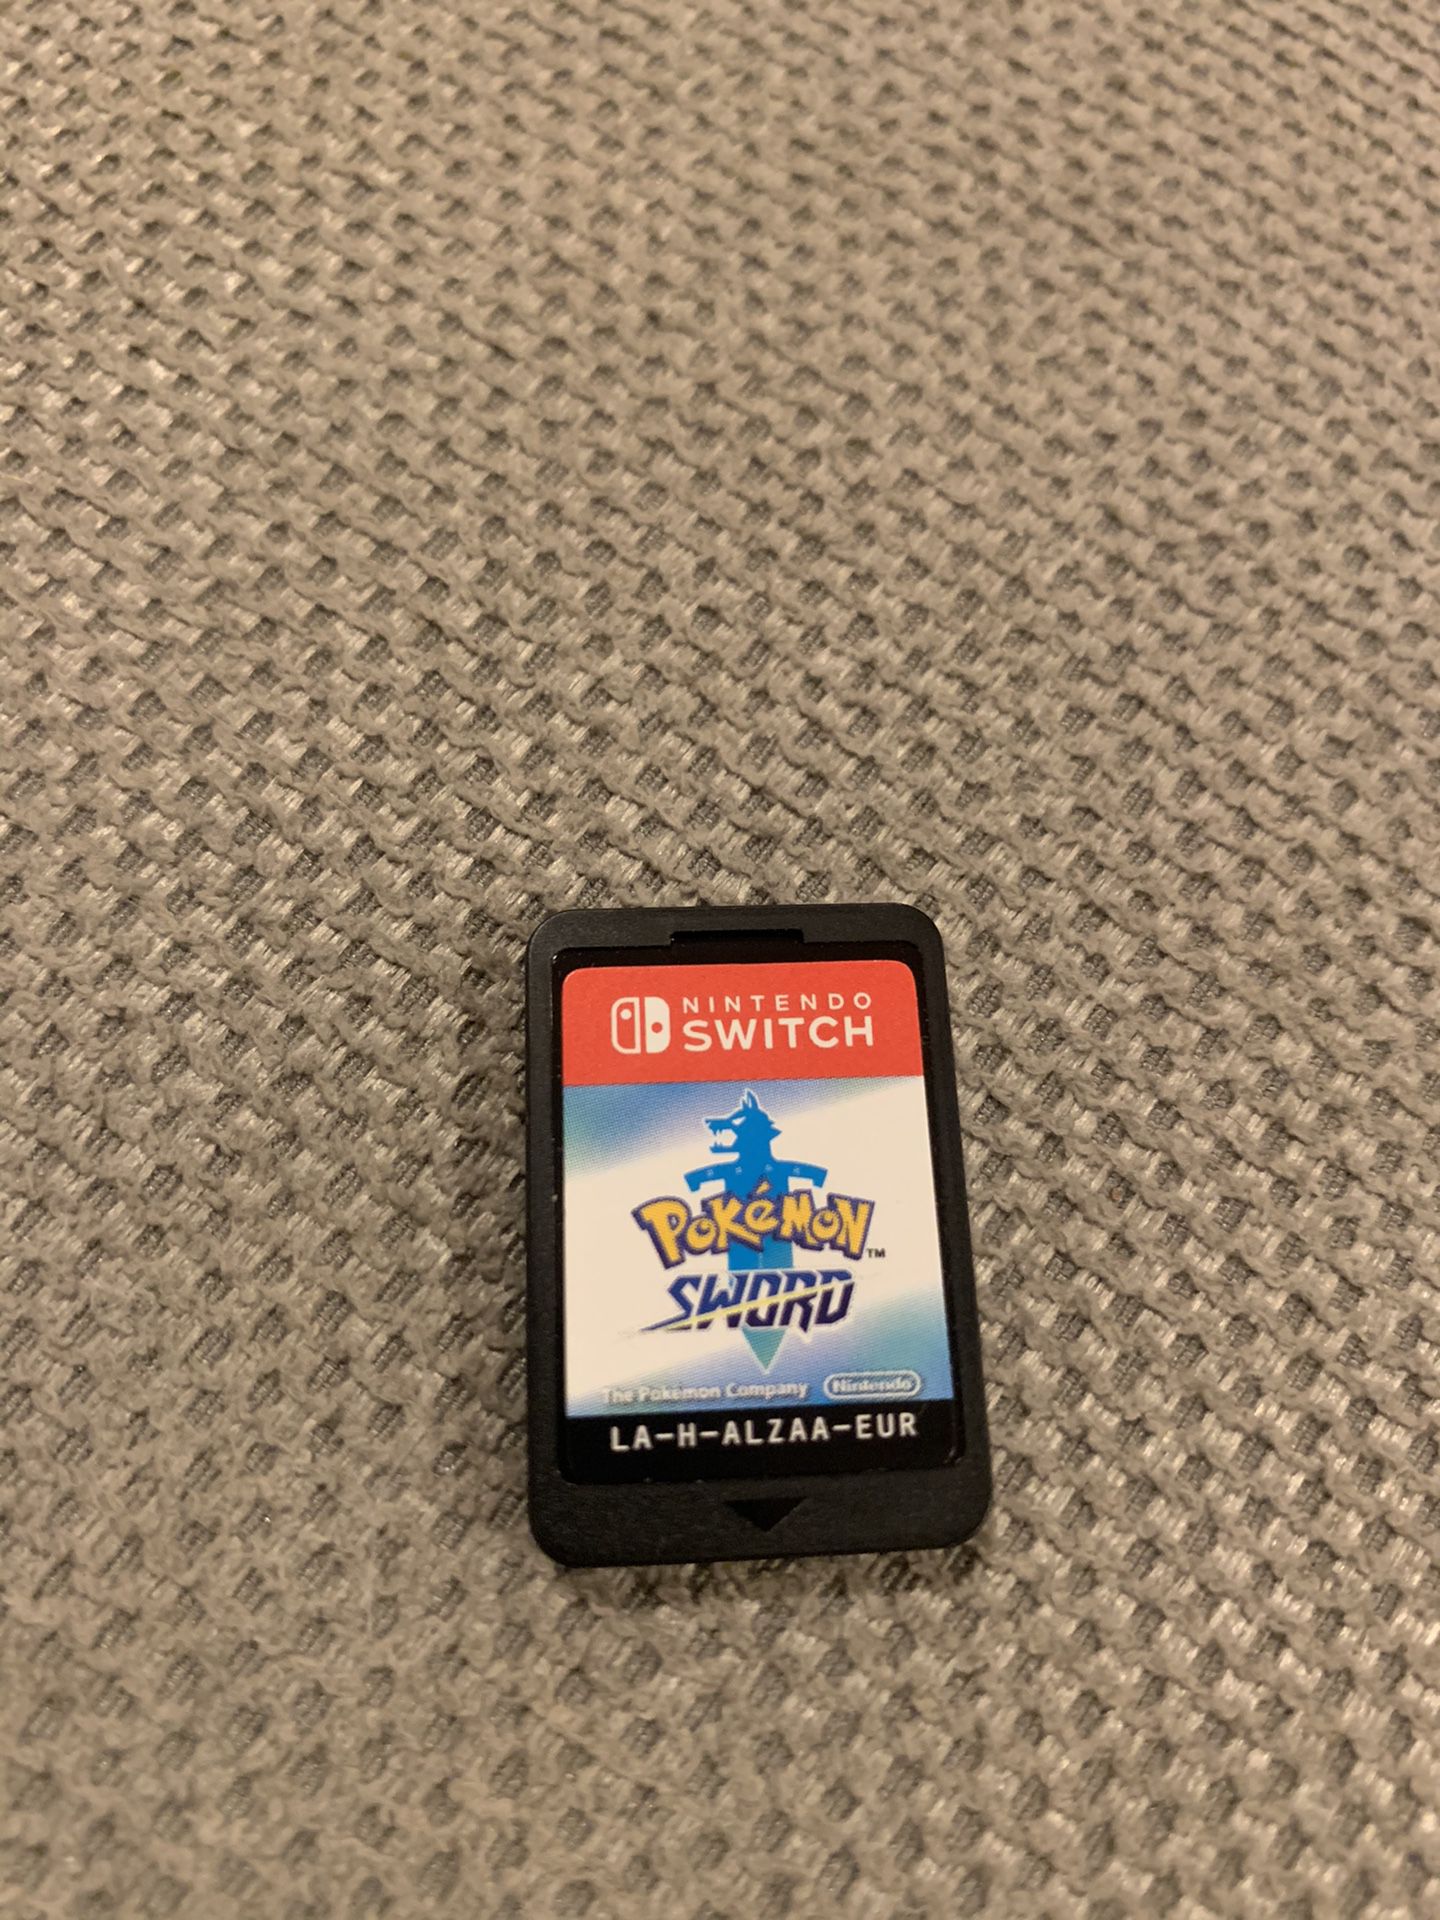 Pokémon Sword for Nintendo Switch! Game Only, No Case. Works Perfectly!!